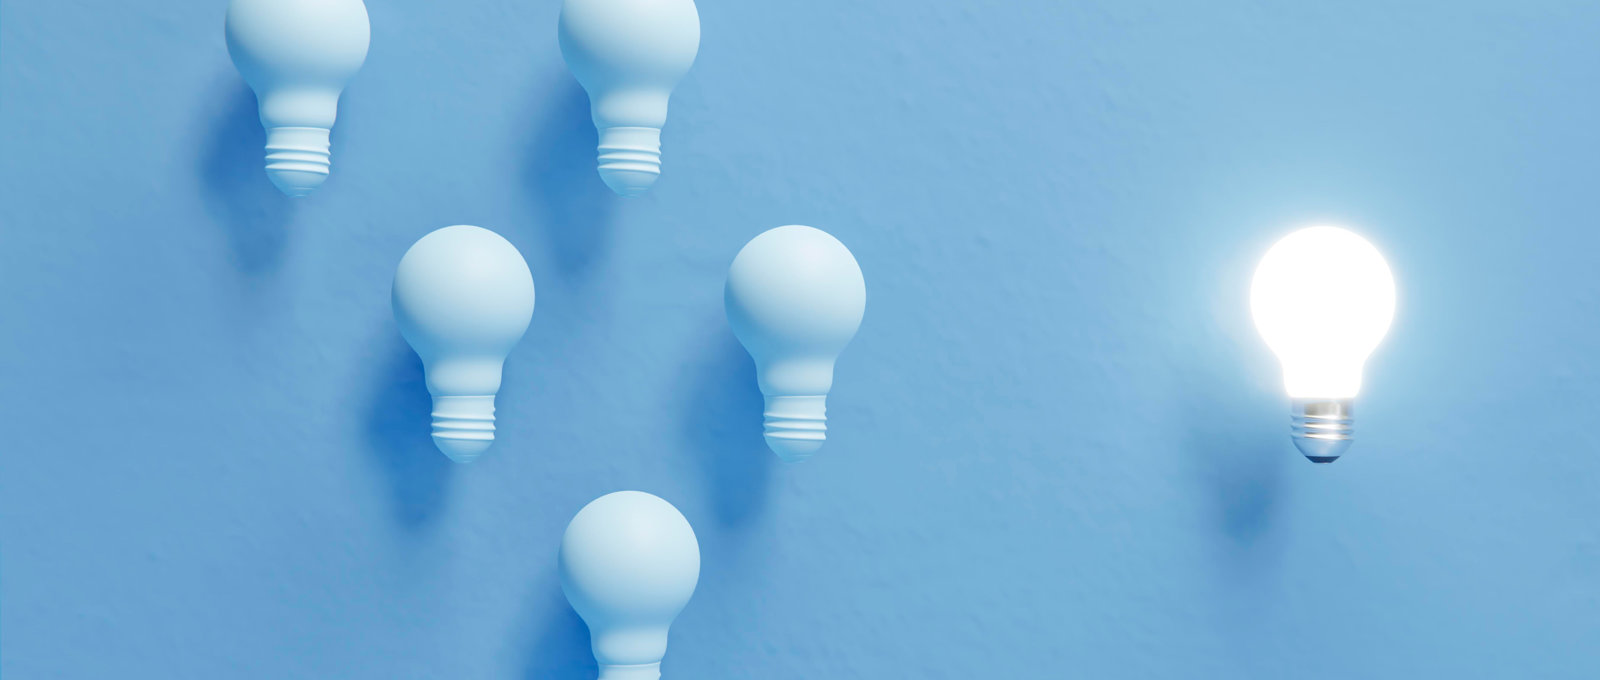 Abstract photo of lightbulbs against a light blue background. Several are dark and grouped together. One is out on its own and lit up.